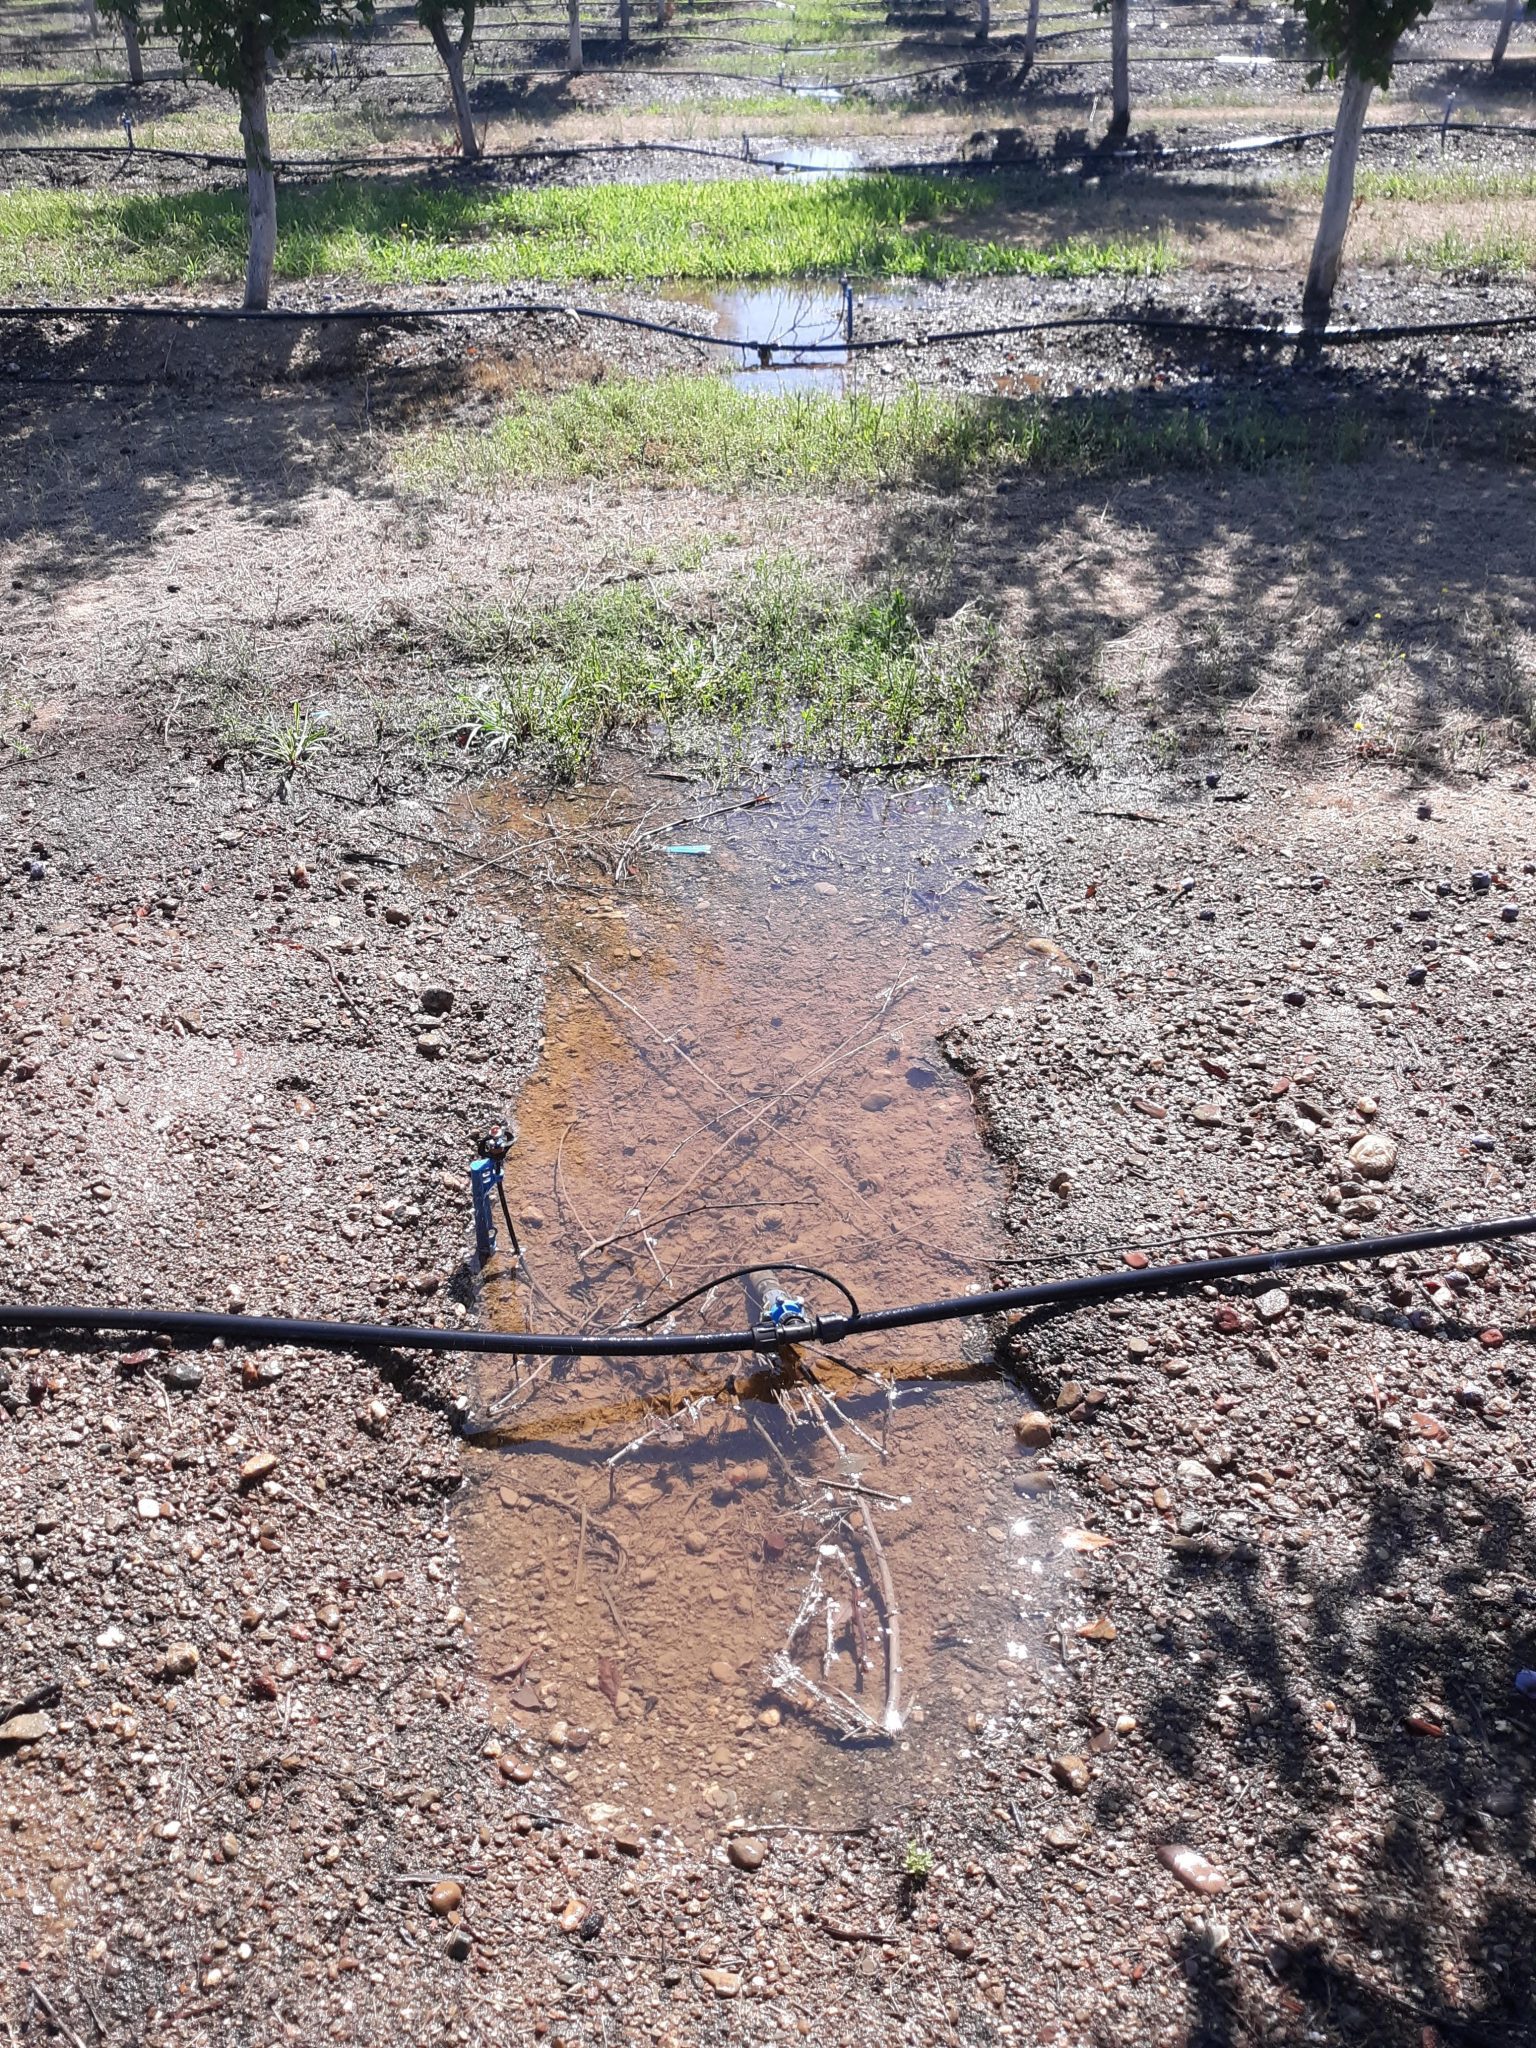 Poorly connected hose lines at inlet Ts are another source of irrigation system water loss.